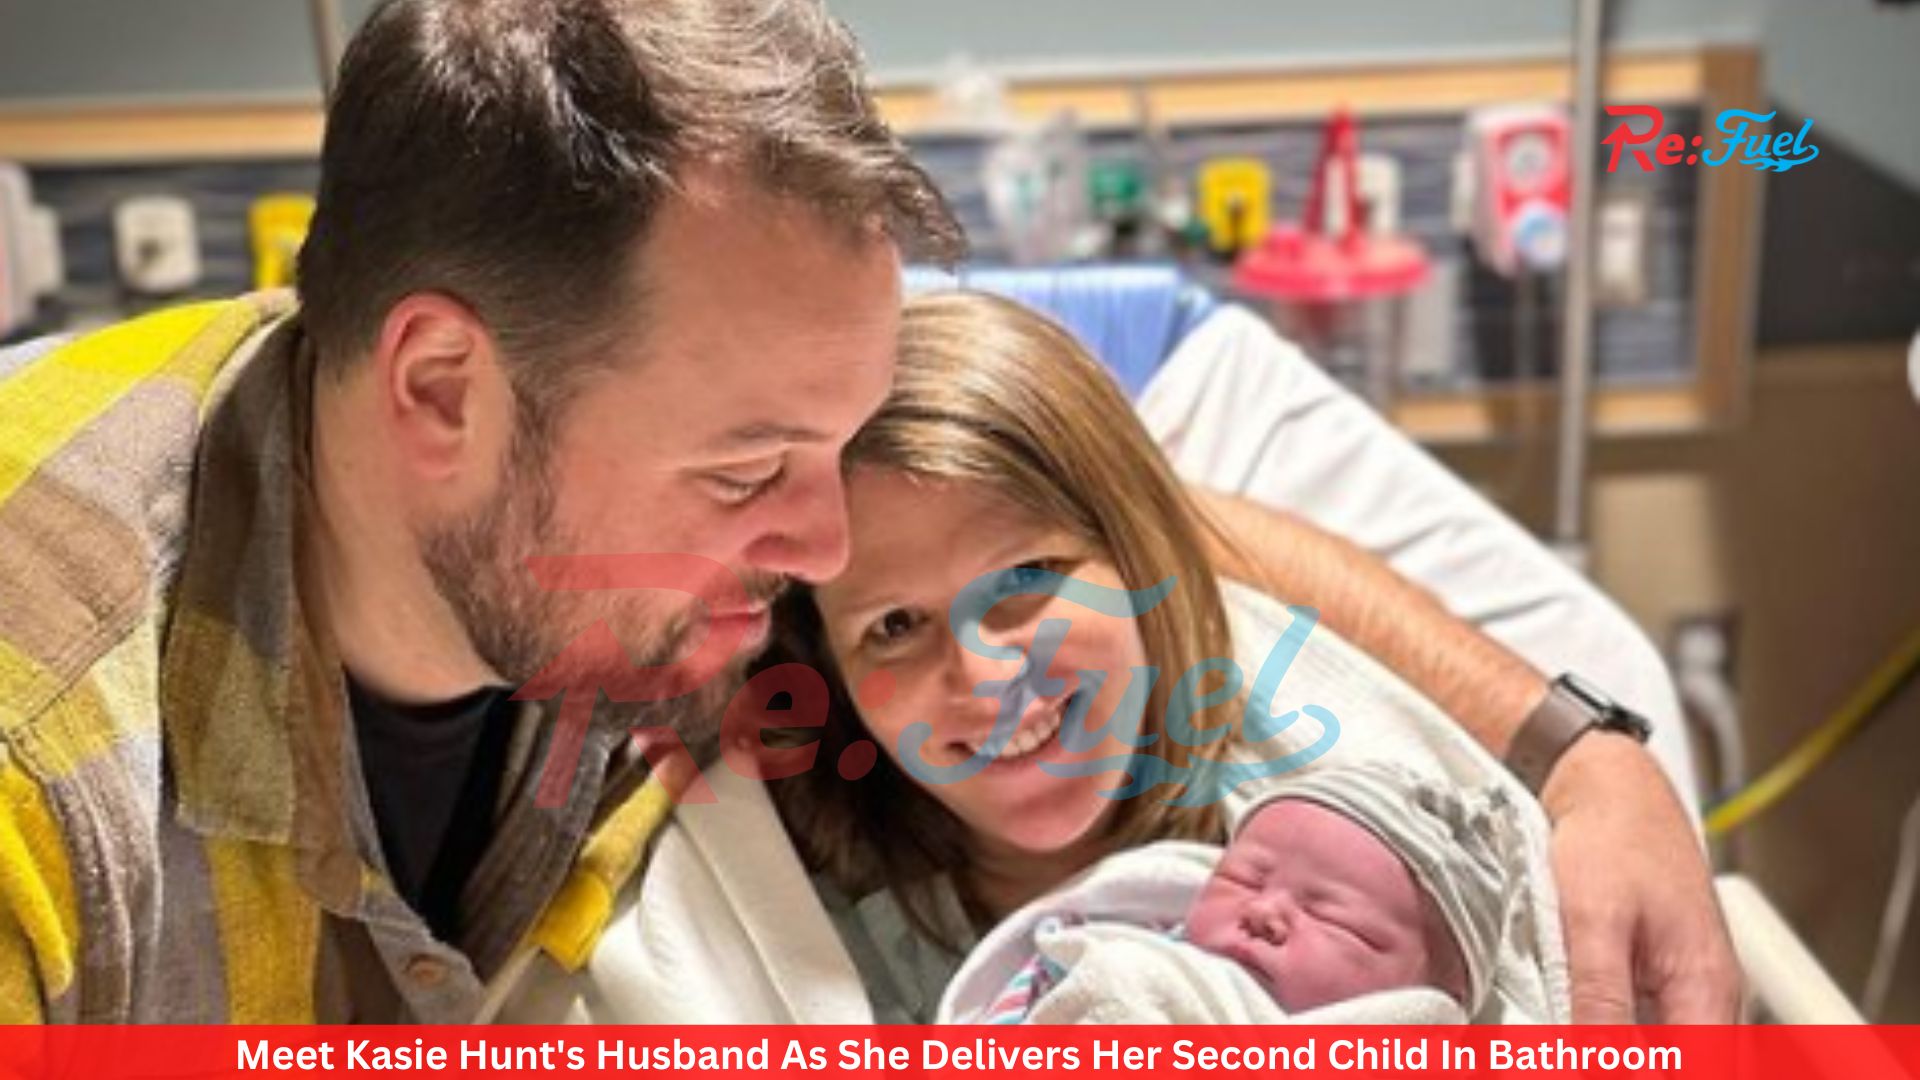 Meet Kasie Hunt's Husband As She Delivers Her Second Child In Bathroom